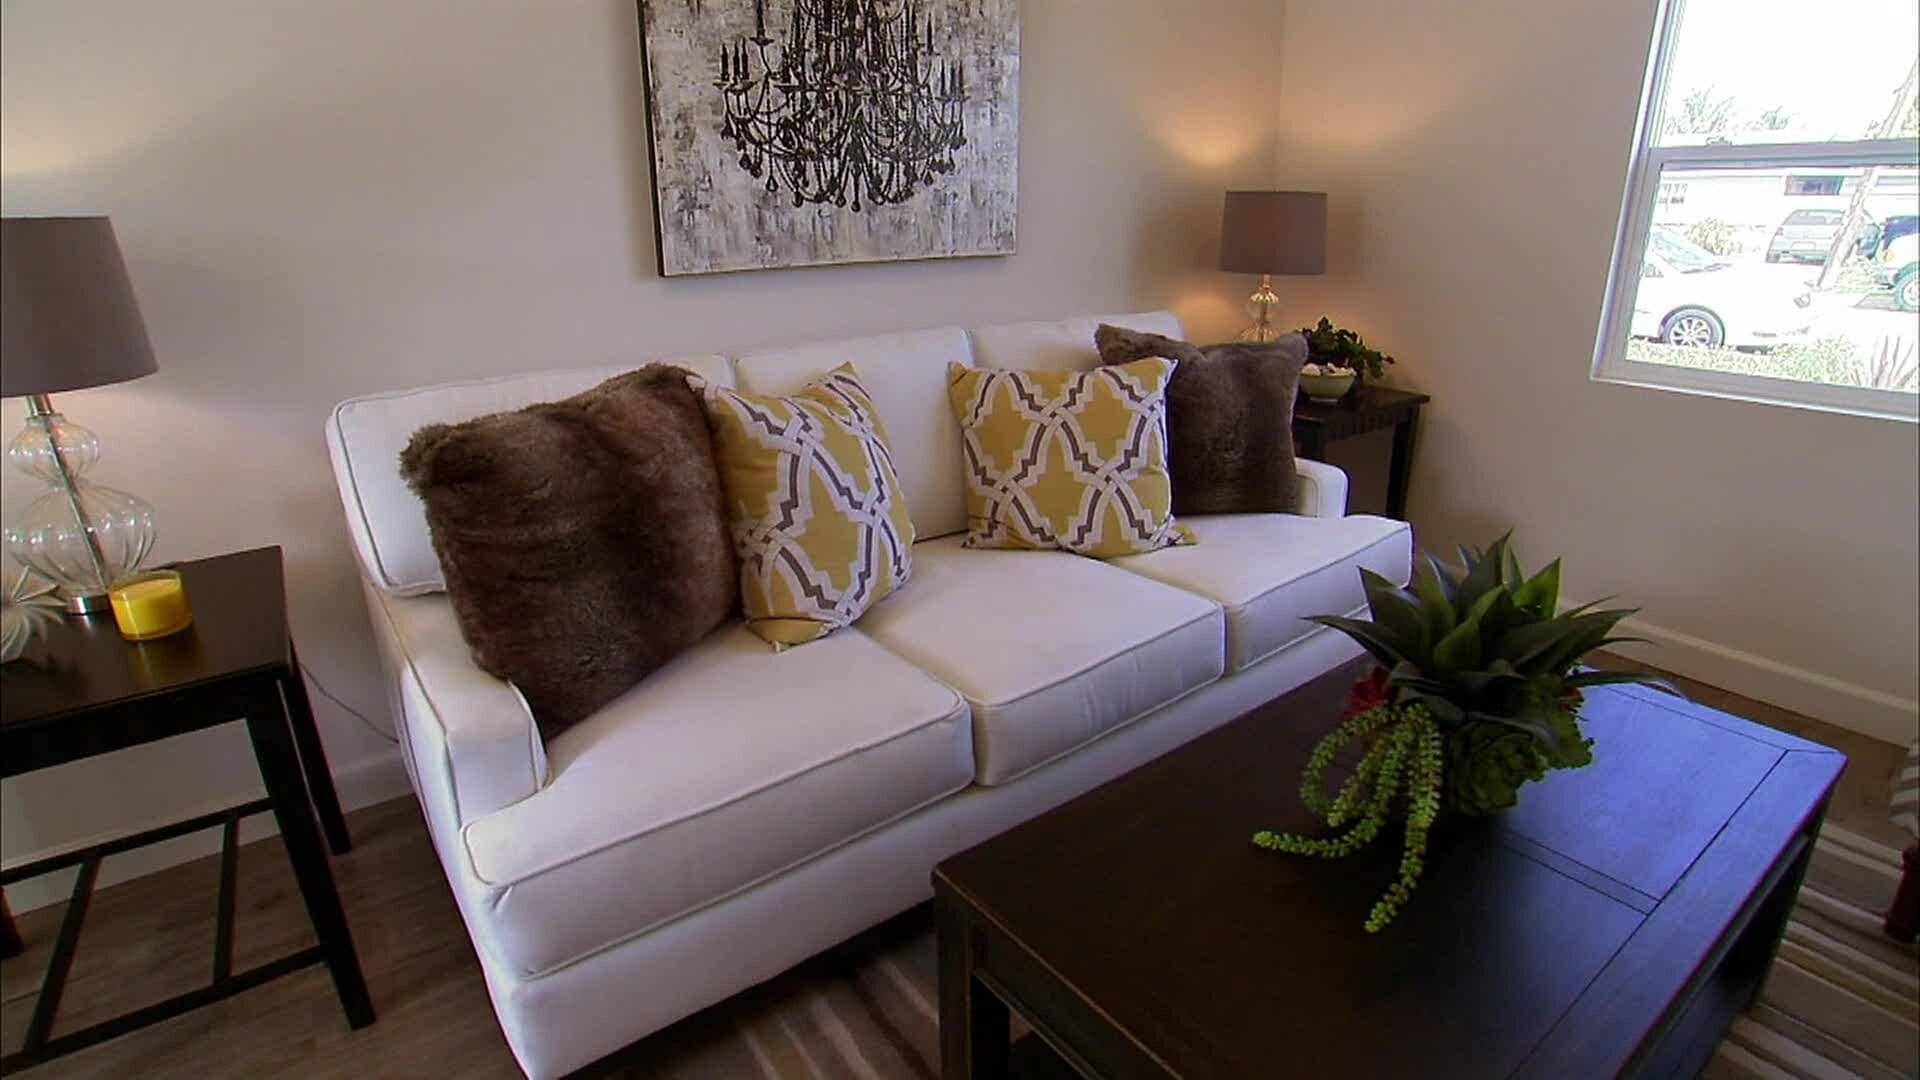 Flip or Flop S4E6 Breaking Up